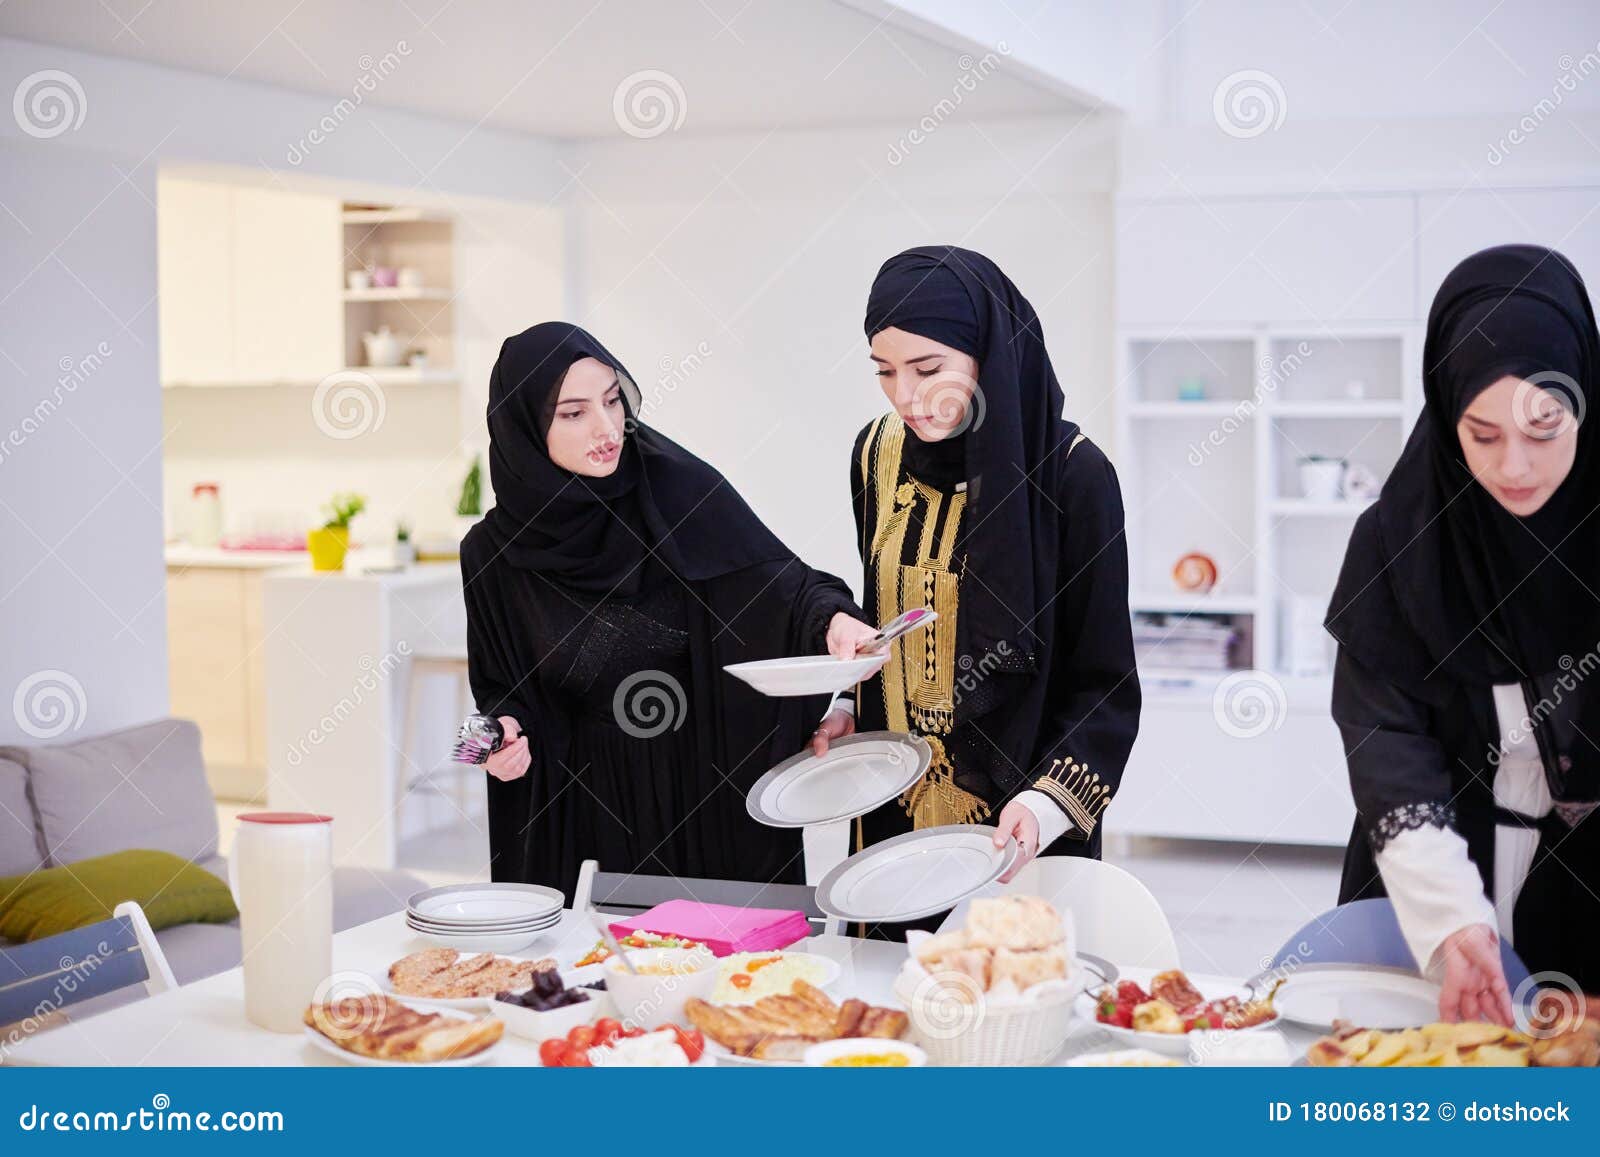 Young Muslim Girls Serving Food on the Table for Iftar Dinner ...